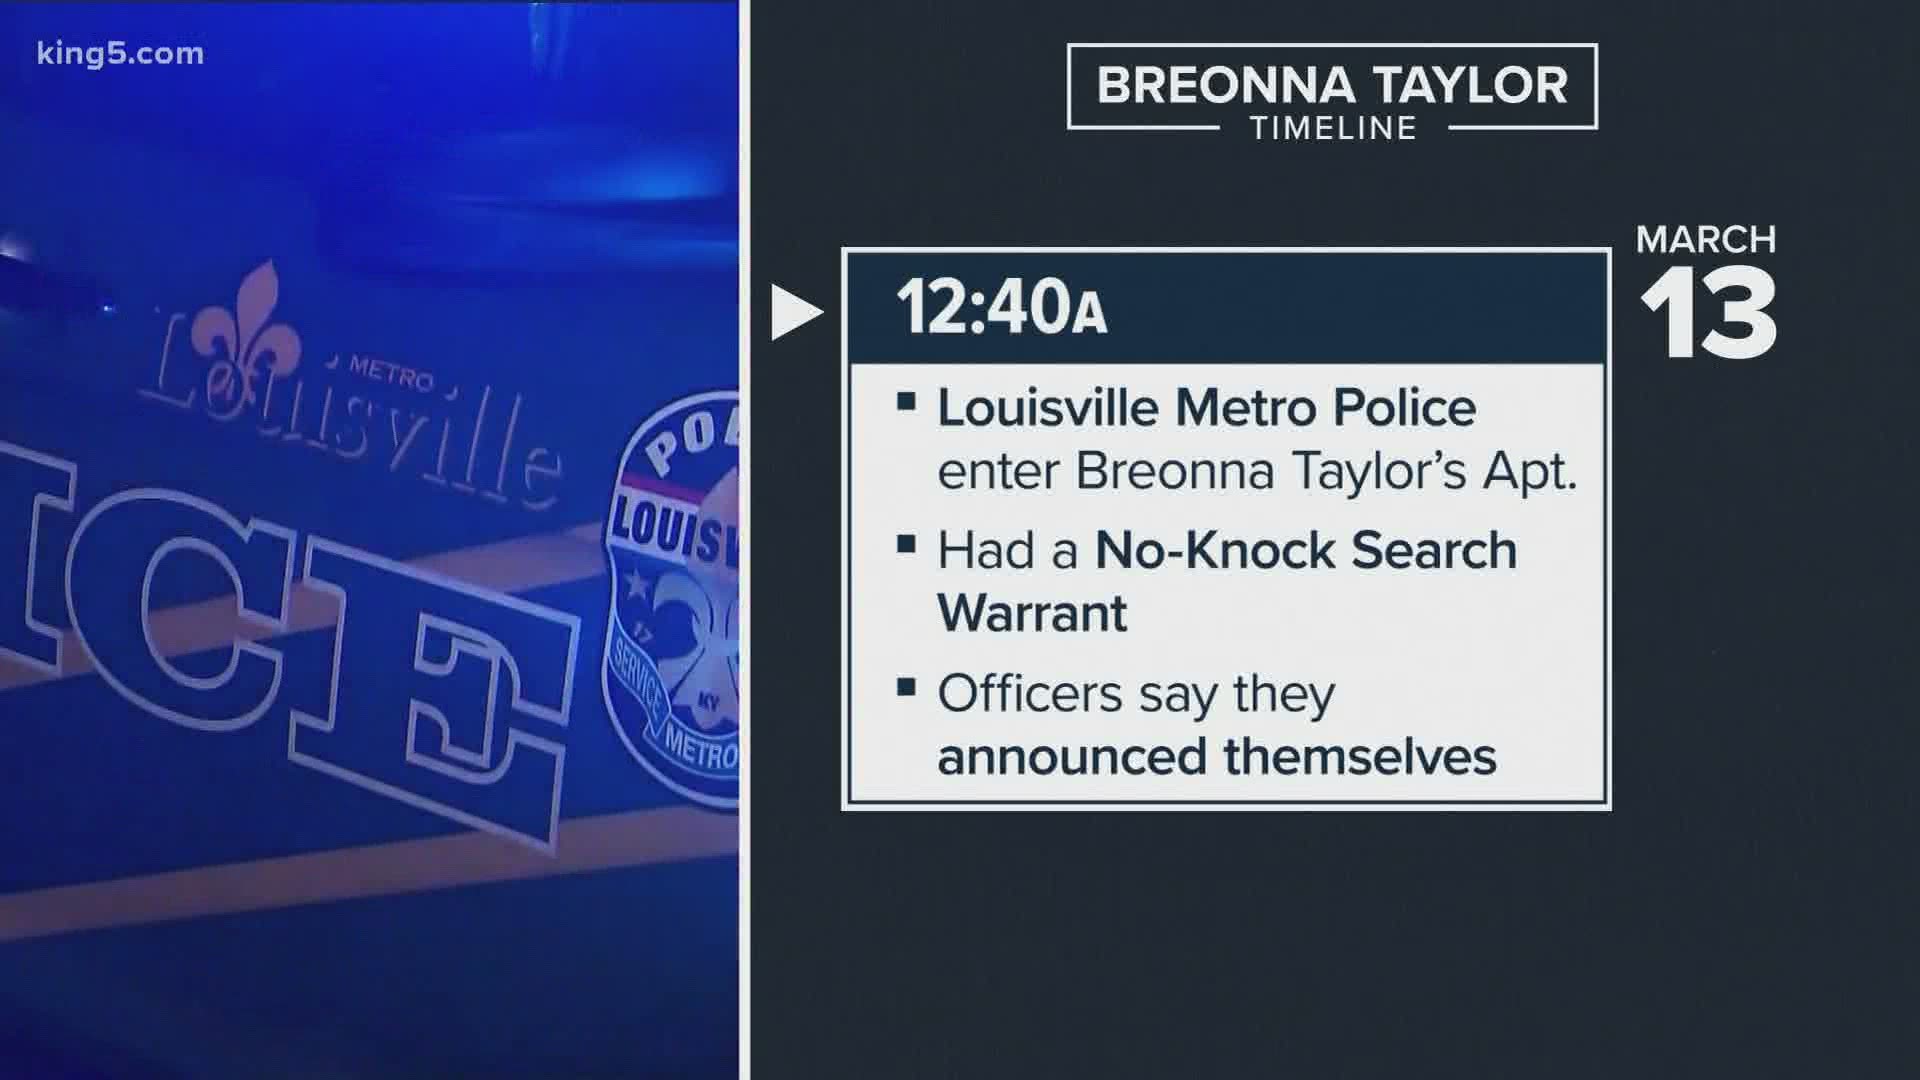 On March 13, 2020, Louisville police shot and killed Breonna Taylor while executing a “no-knock” warrant at her home. We look back at how her case started.